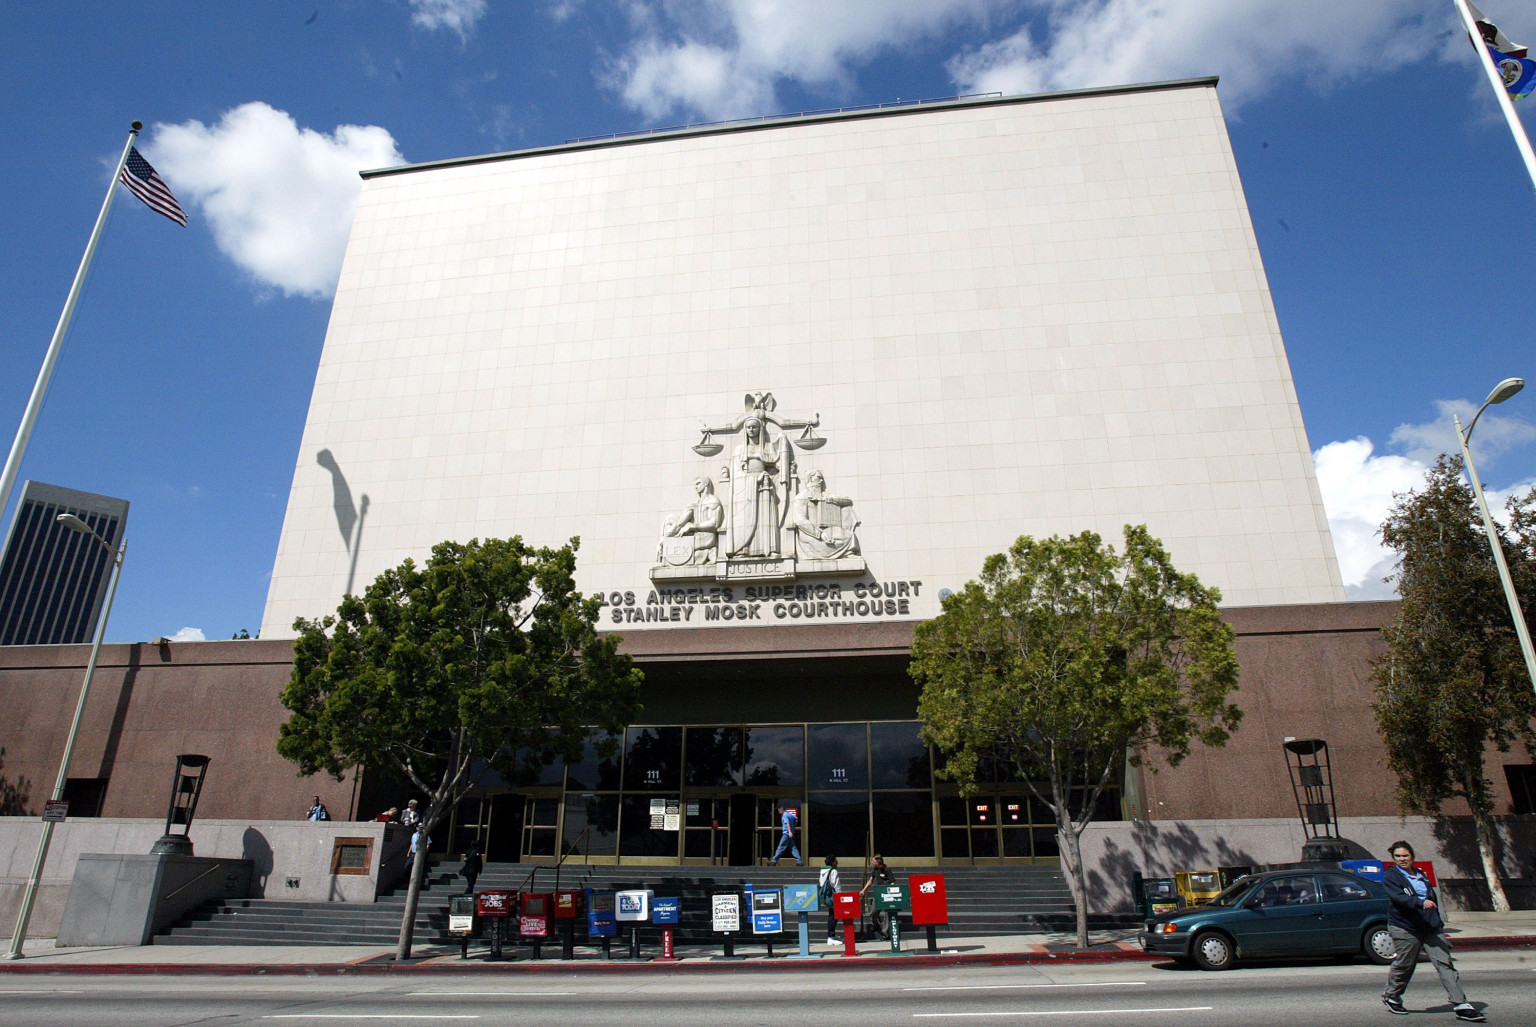 SUPERIOR COURT OF LOS ANGELES COUNTY TO REOPEN TODAY FOR ESSENTIAL AND